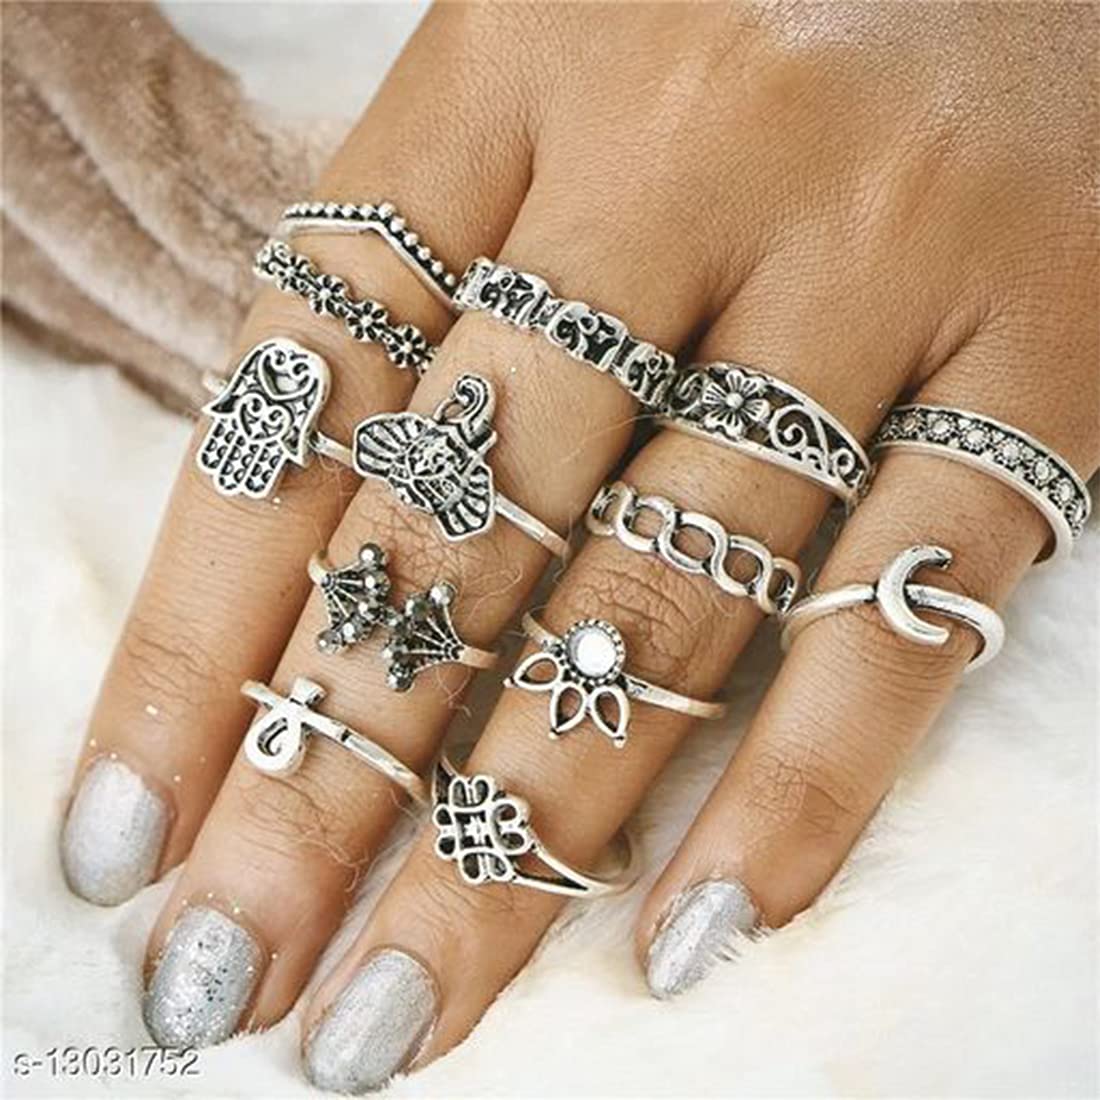 Yellow Chimes 13 Pieces Combo Multi Design Vintage Style Midi Finger Silver Oxidised Knuckle Rings Set for Women and Girls (Model Number: YCFJRG-86NKLOXD-C-SL)